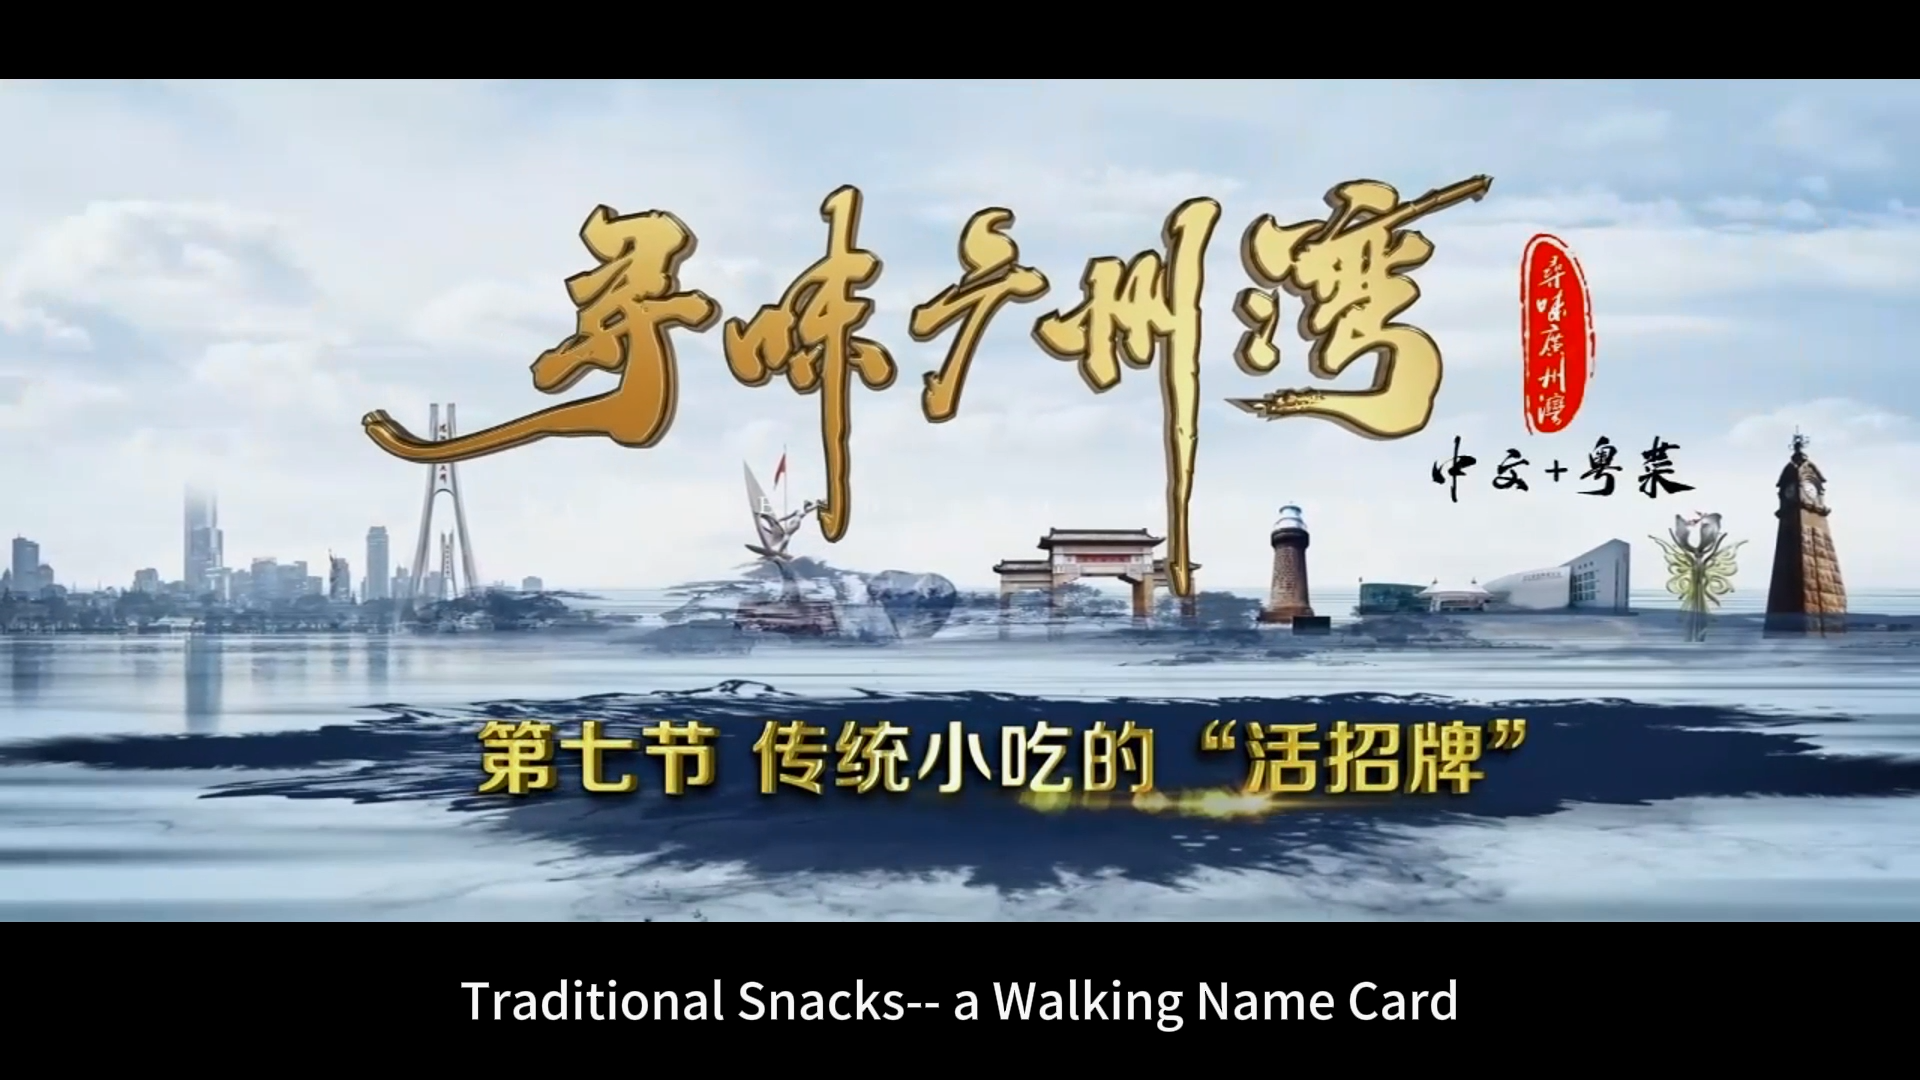 Traditional Snacks-- a Walking Name Card